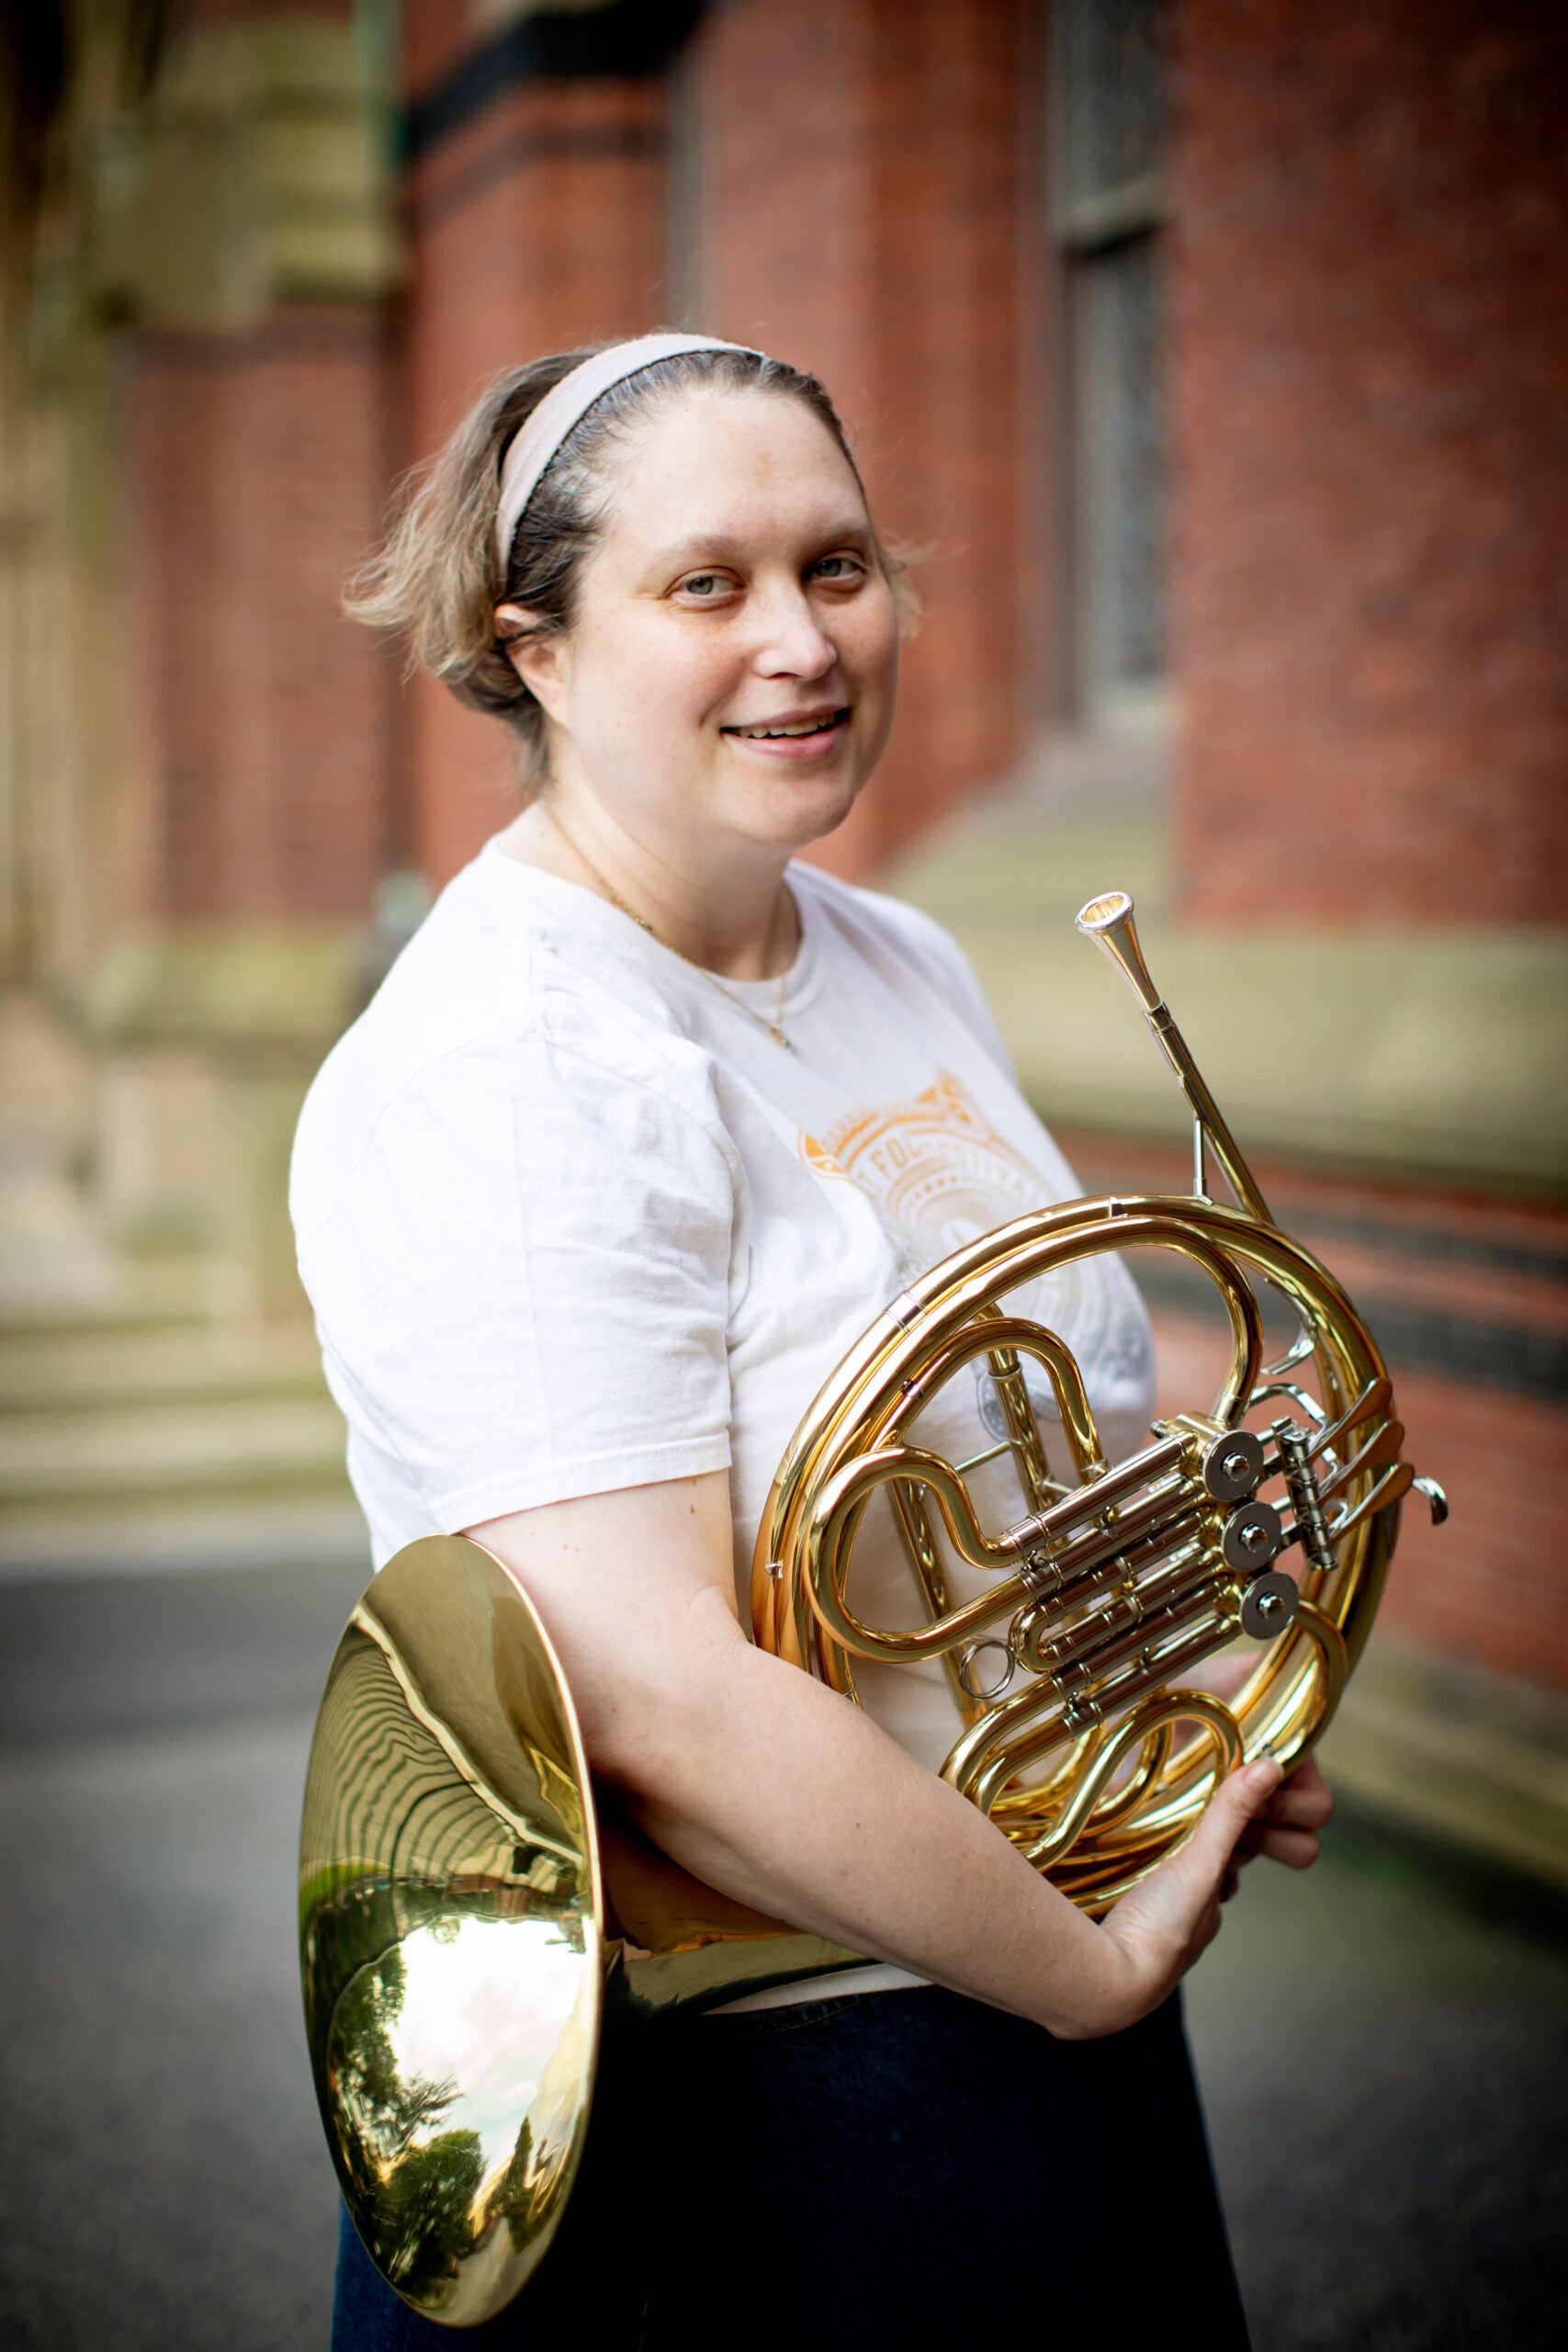 Jill Smith plays the French Horn in the band.